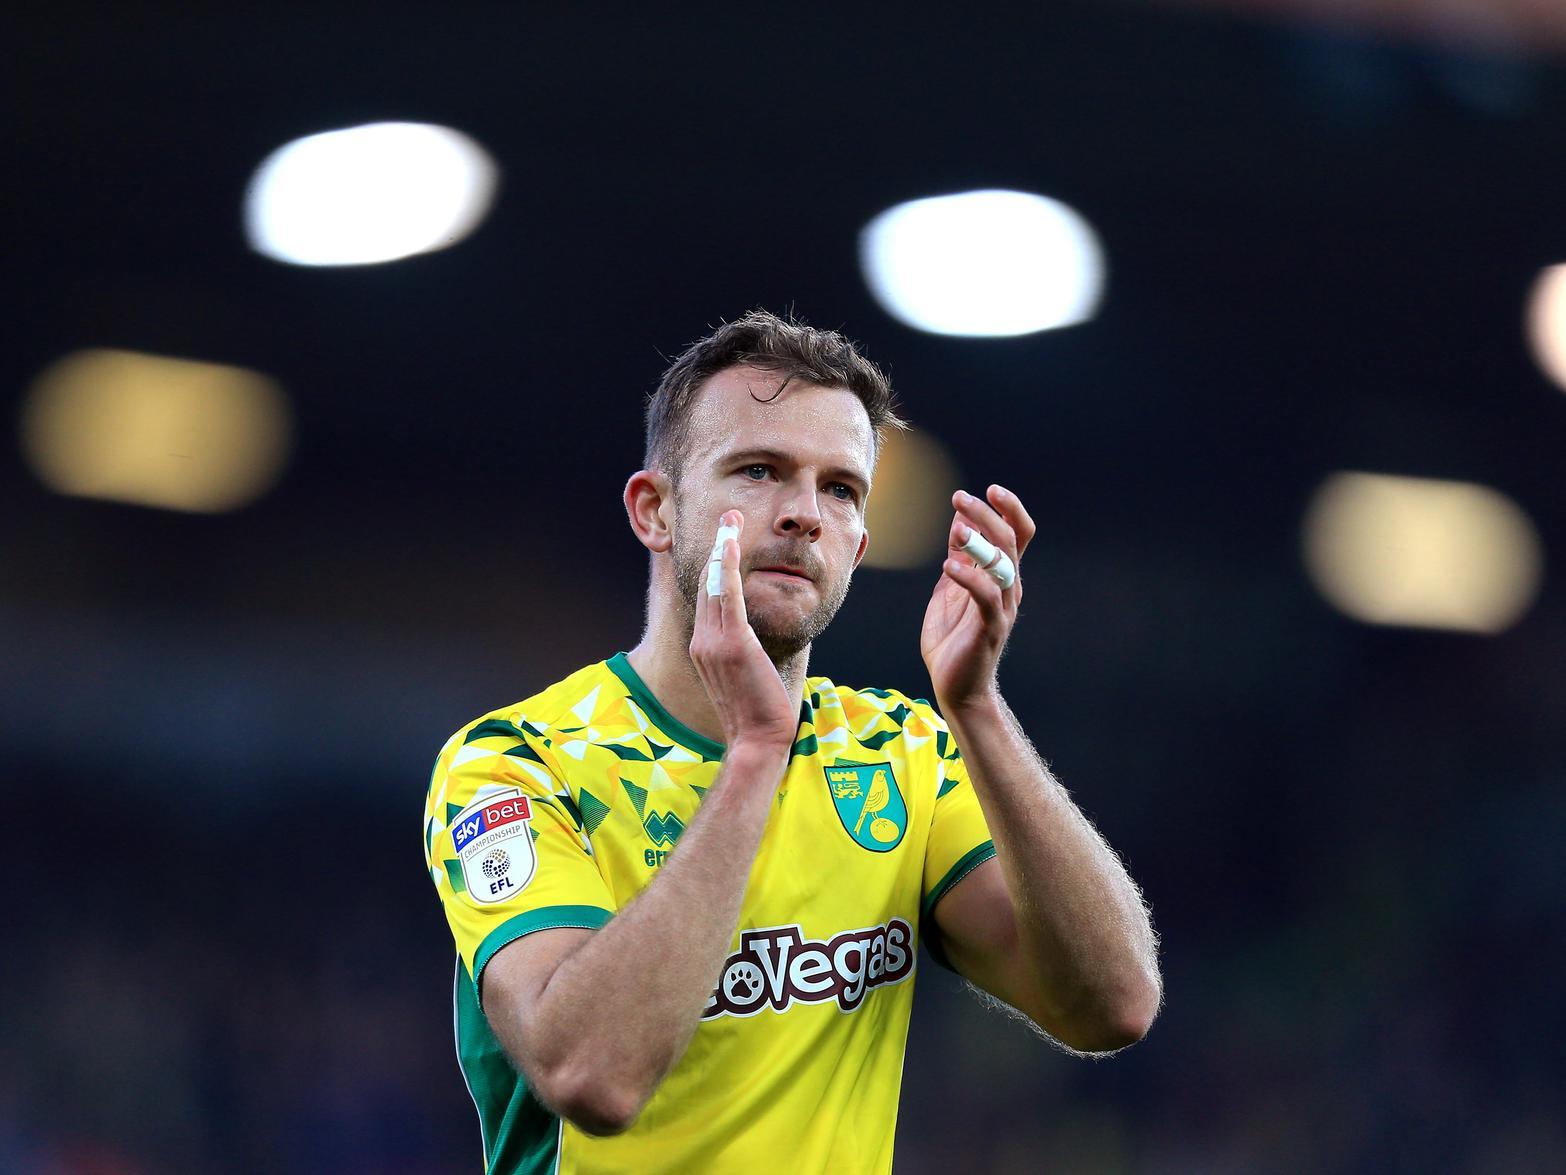 Norwich City were apparently willing to pay both the necessary fee and wages to land Sheffield Wednesday's Jordan Rhodes over the summer, but saw their move blocked by theOwls. (Football League World)